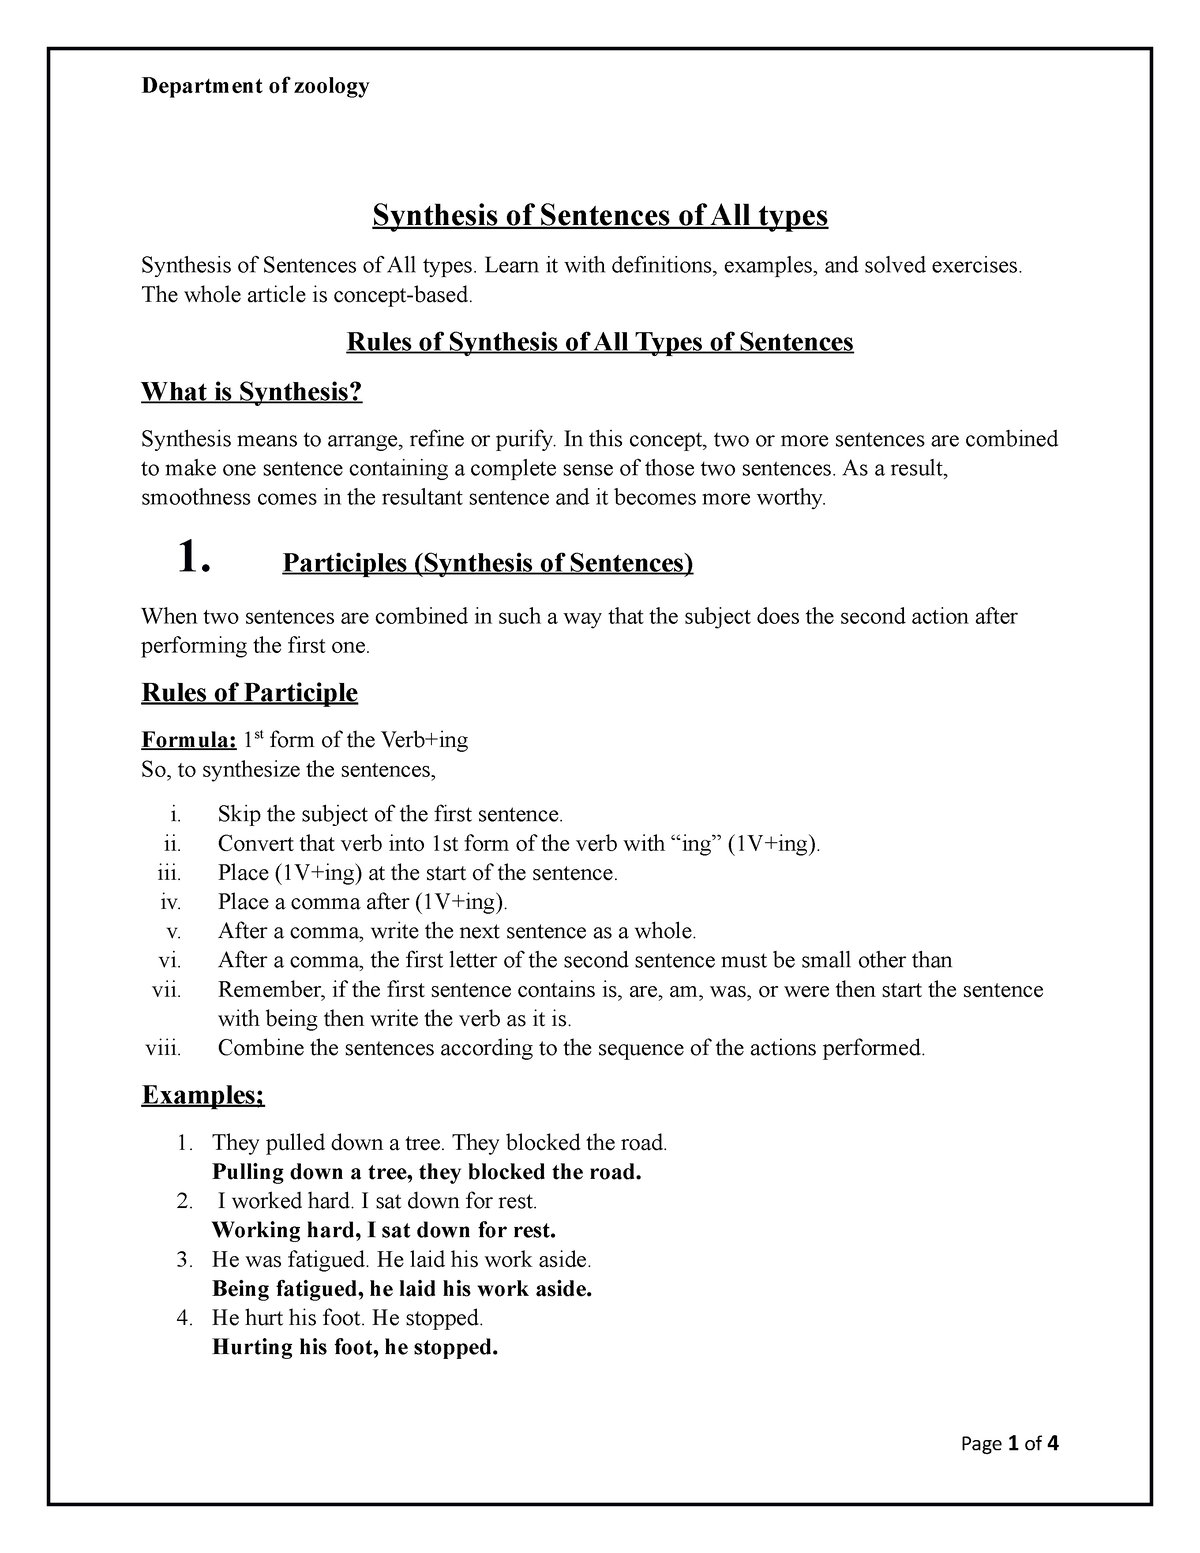 Assignment Synthesis Of Sentences Of All Types Synthesis Of Sentences 